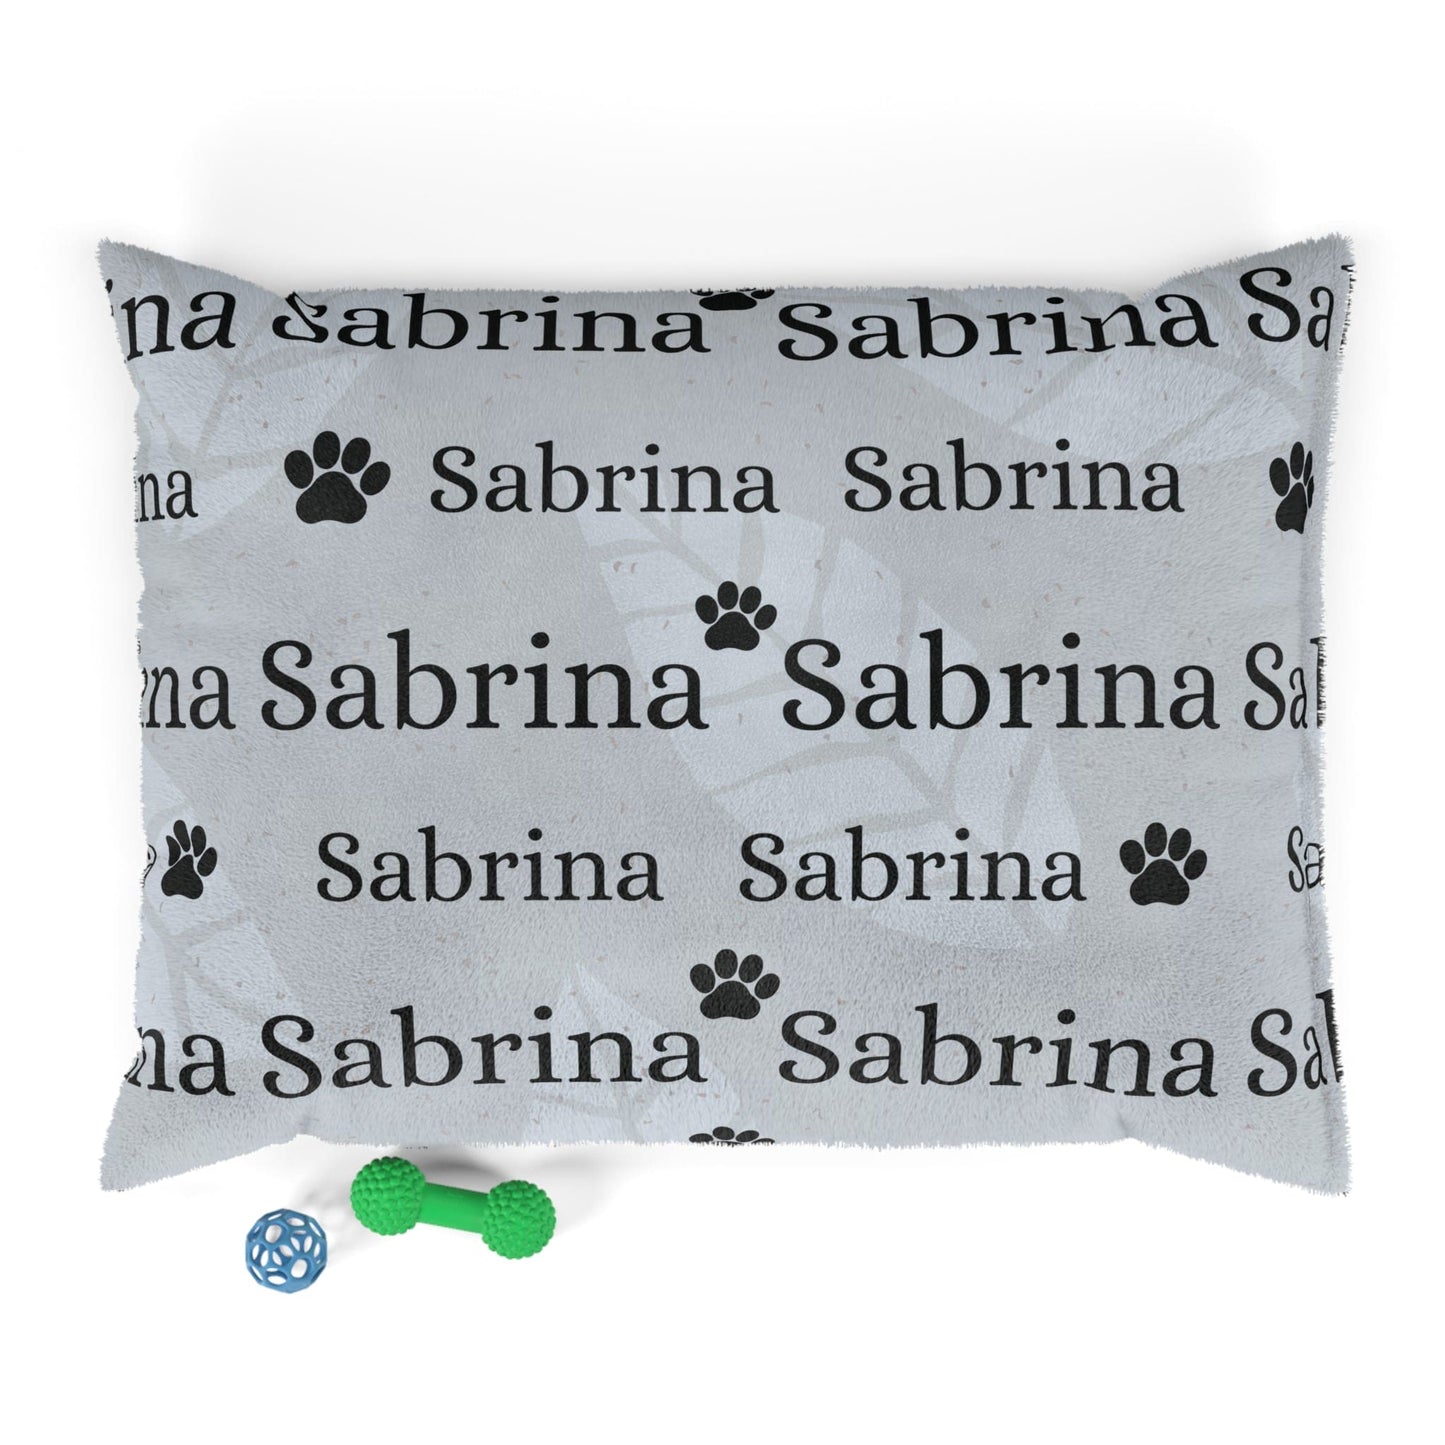 Cute Luxury Dog Bed. Custom Dog Bed And Matching Dog Blanket With Your Dog's Name.